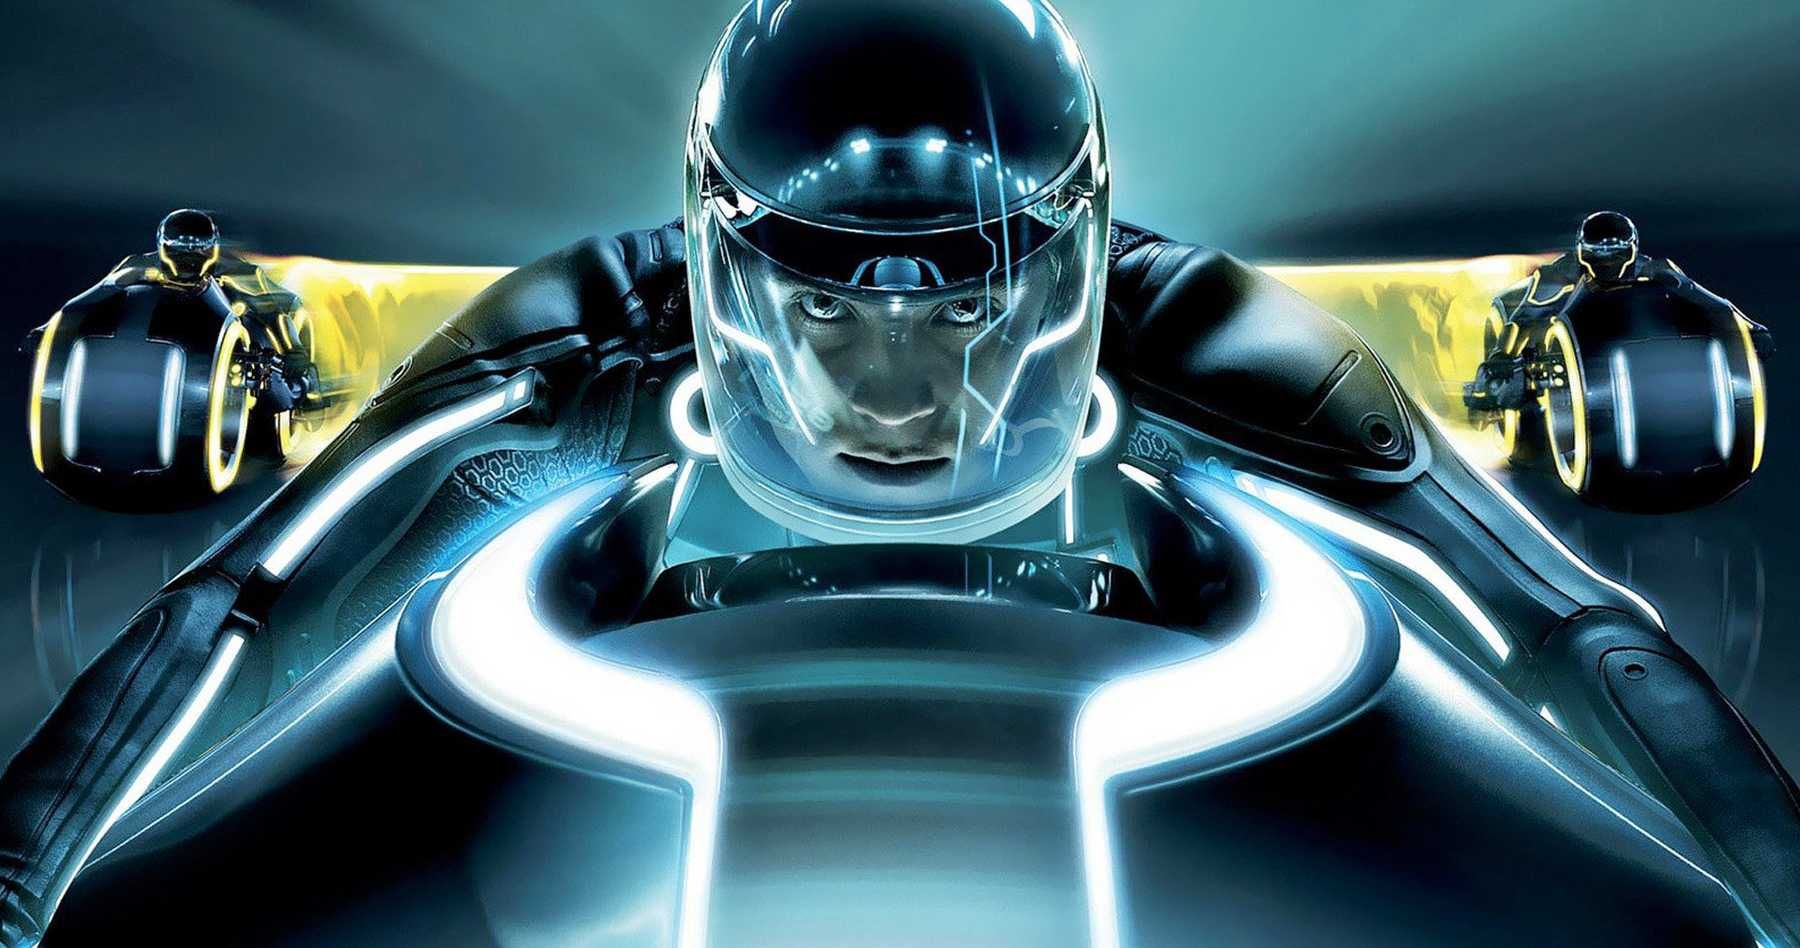 Tron: Legacy Director Remains Very Proud of His Sequel 10 Years Later